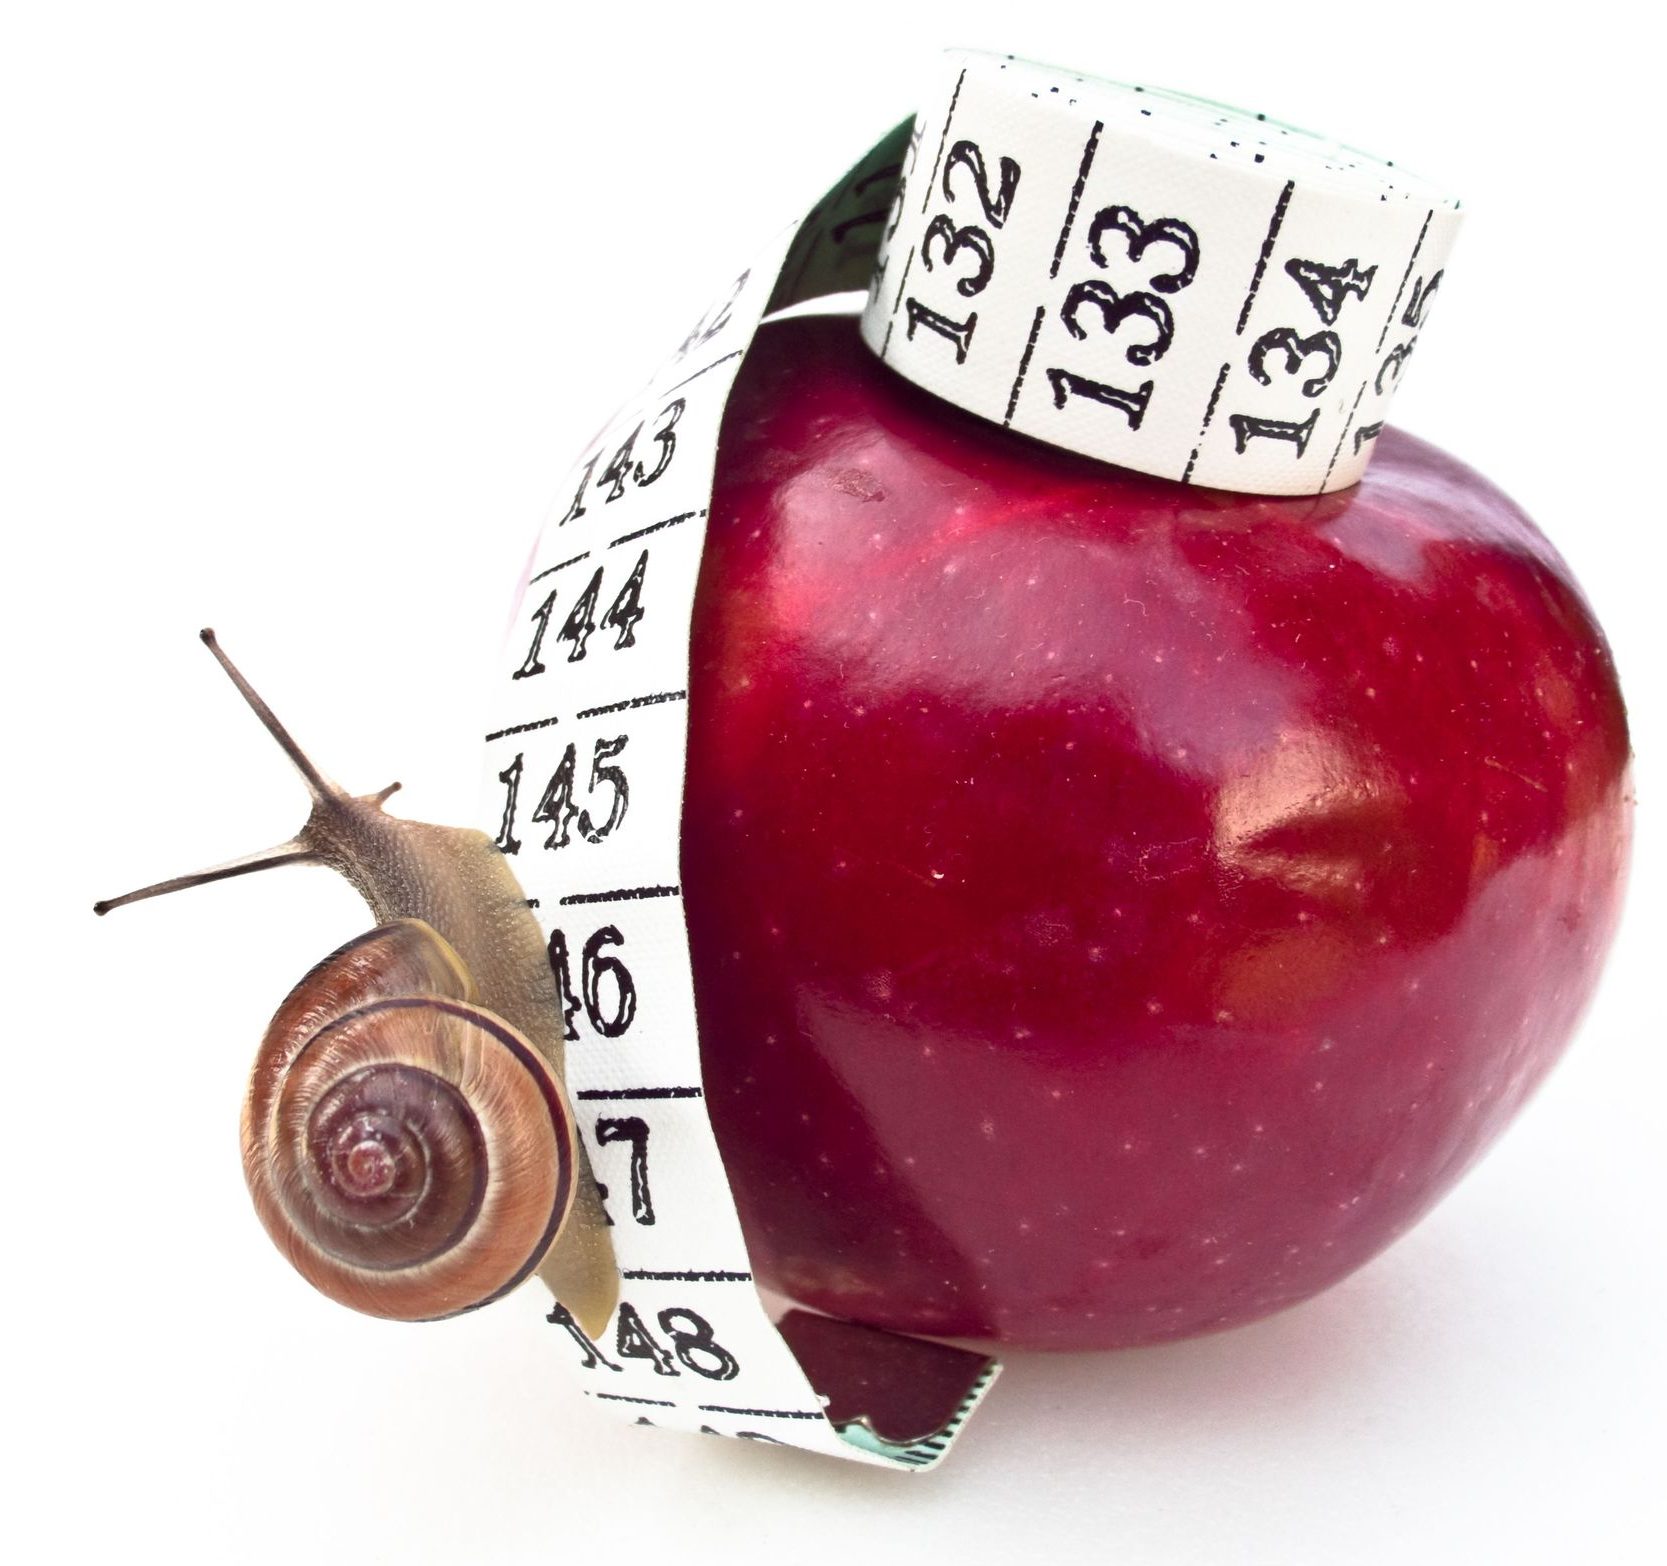 6300373 - a snail climbing up an apple by a tape measure. health concept.